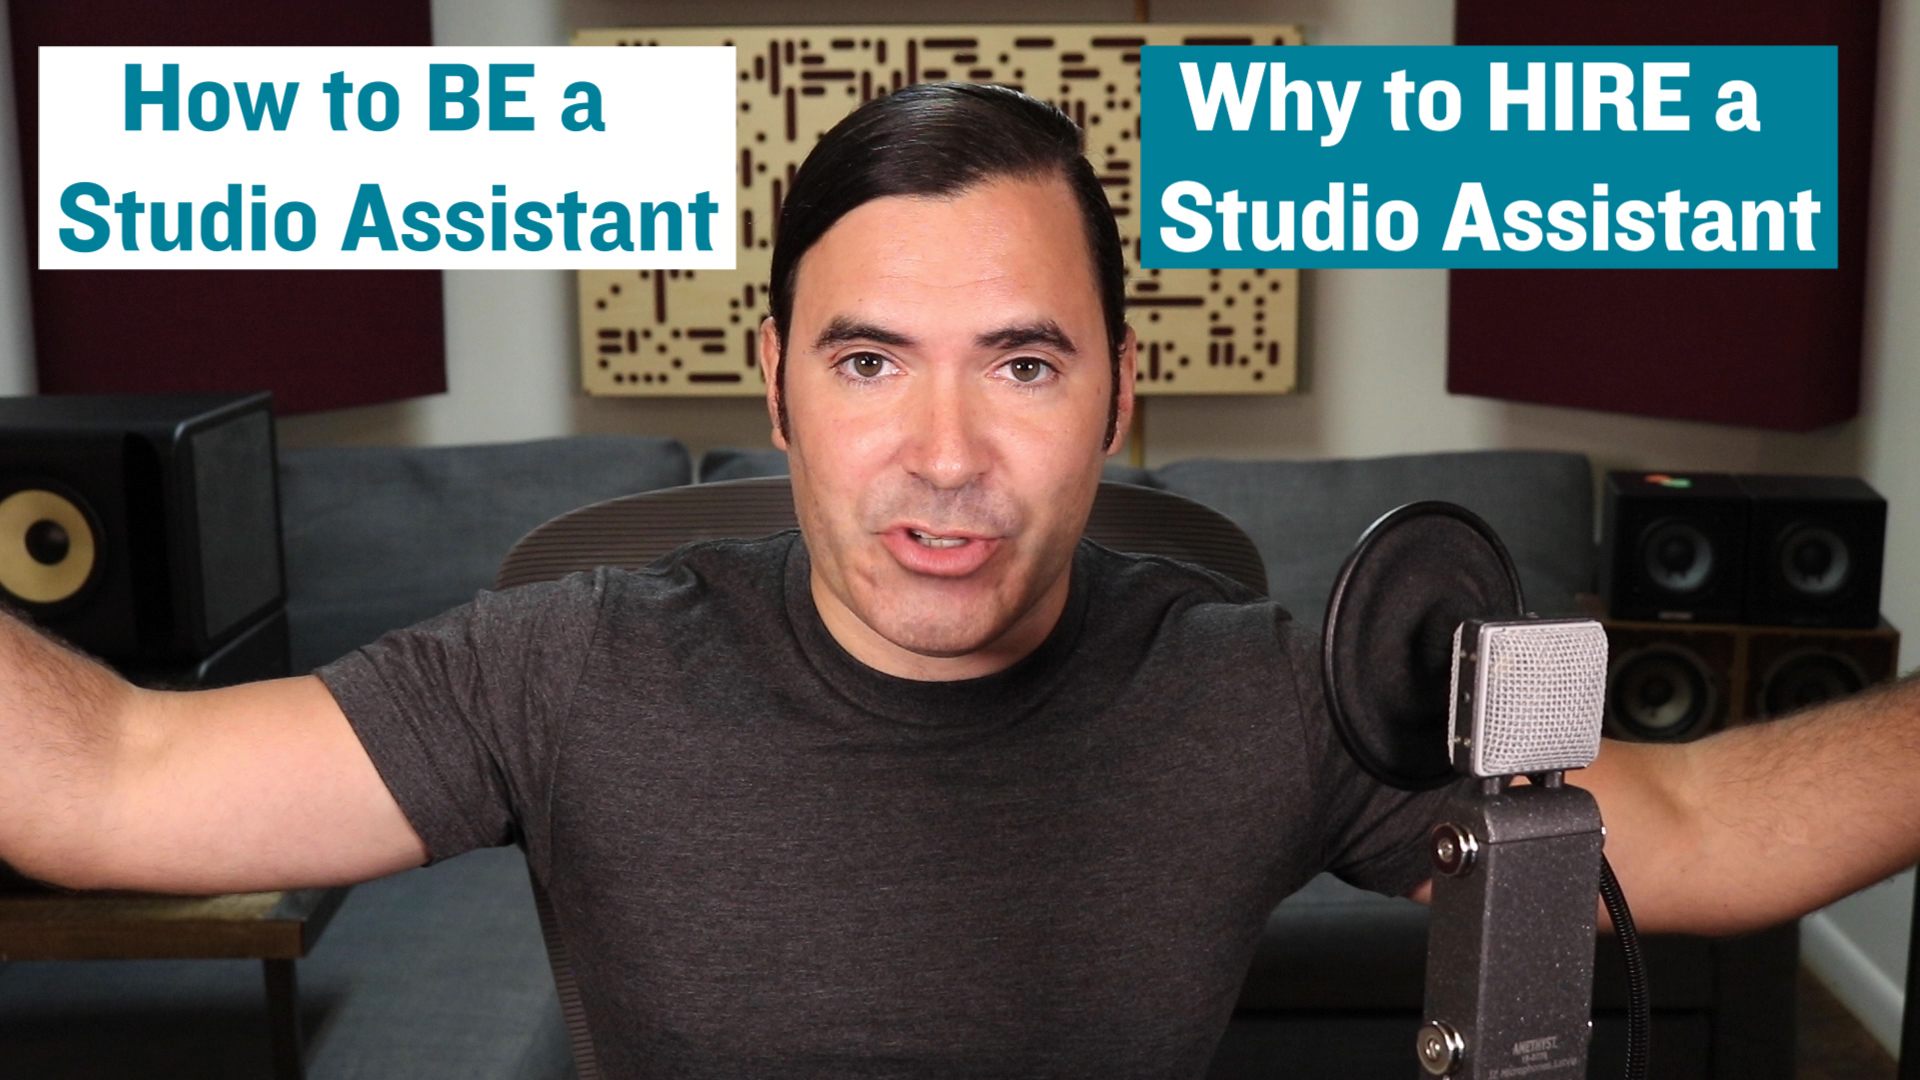 Top Advice for Studio Assistants in the 21st Century